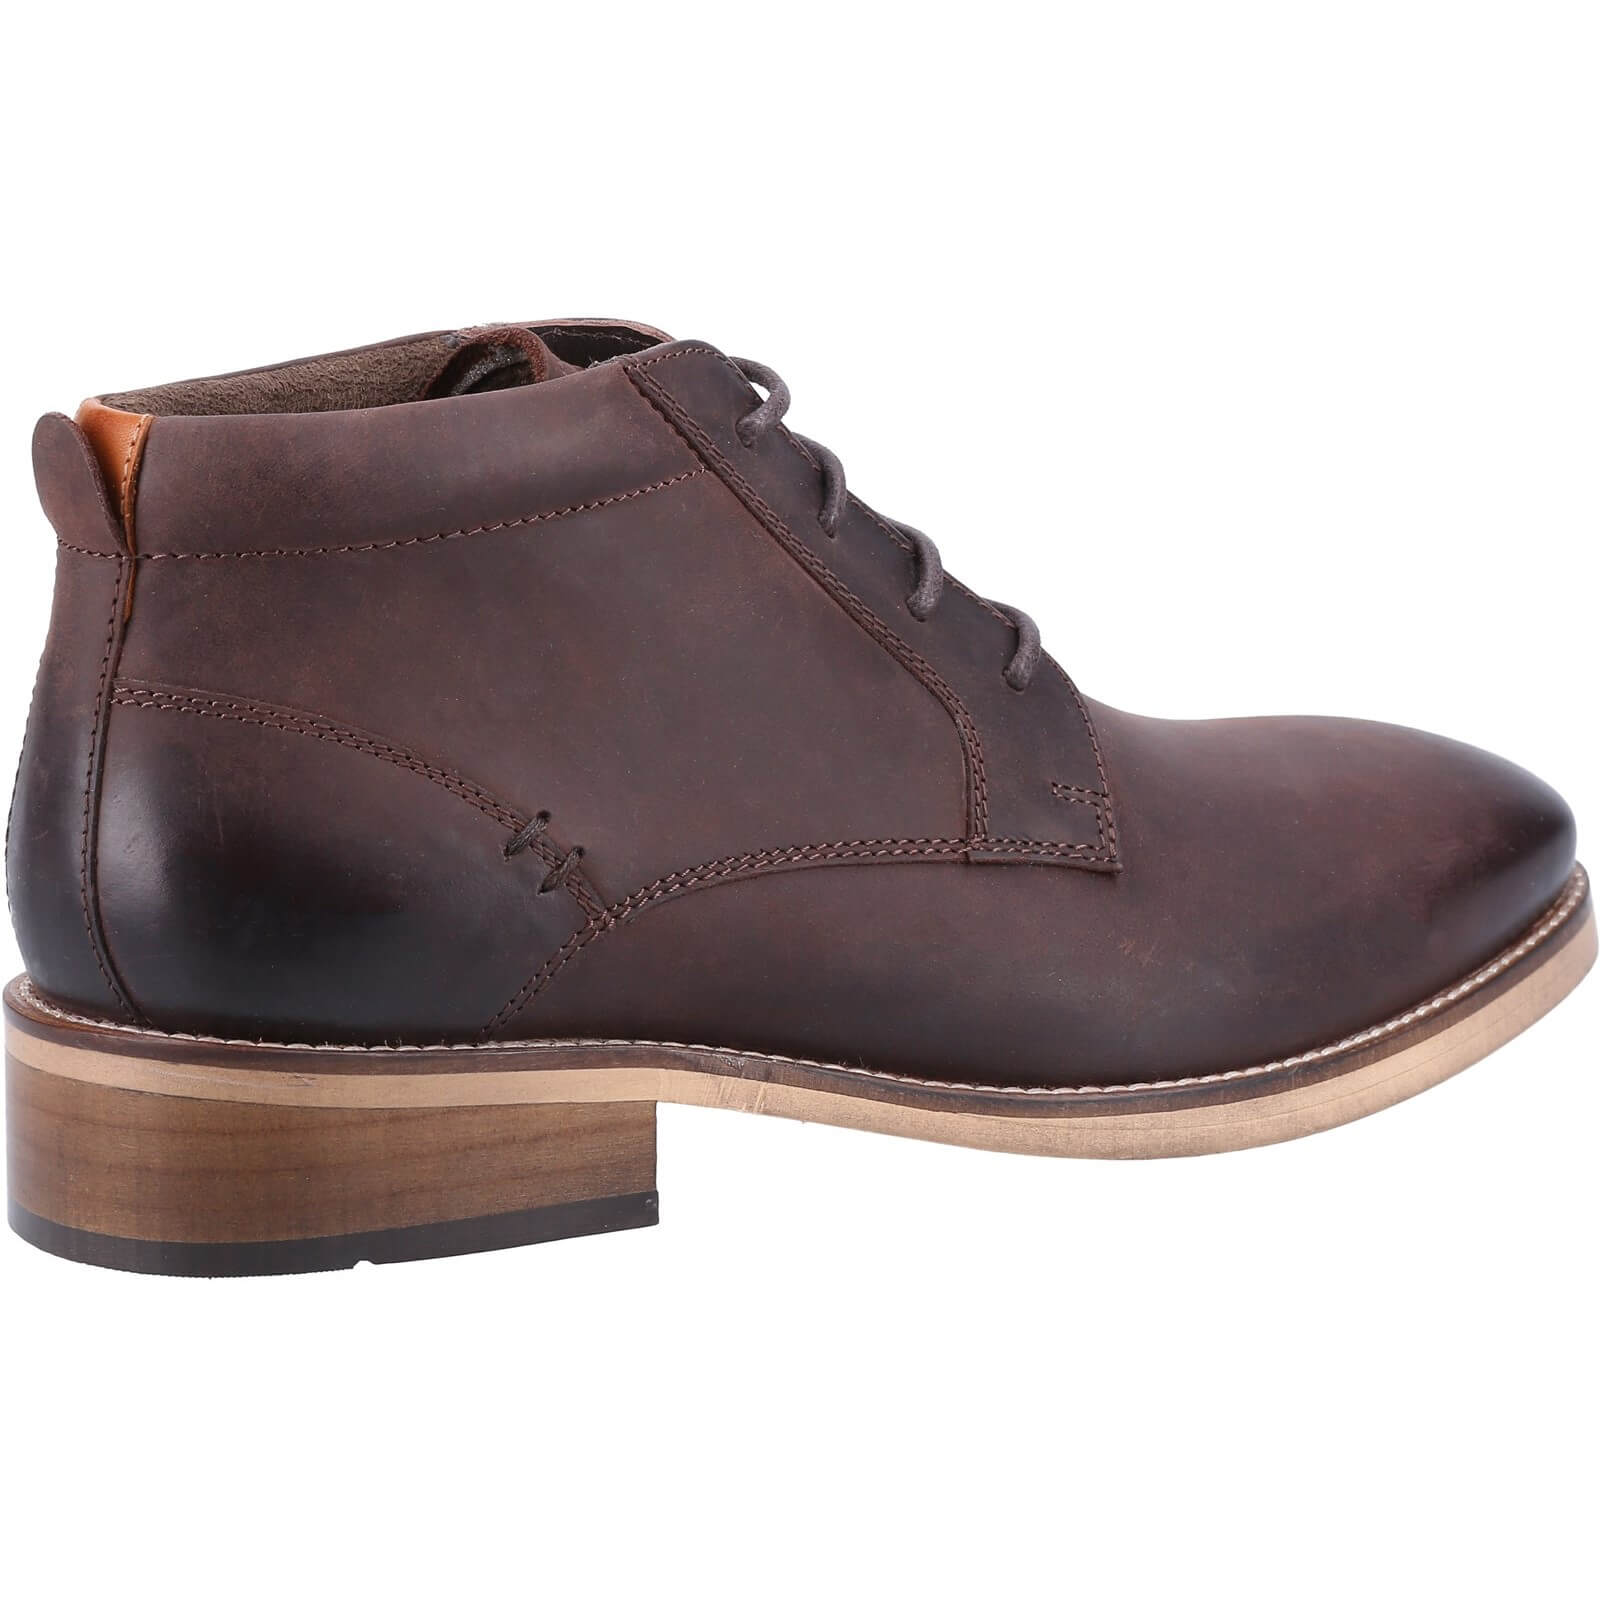 Cotswold Harescombe Boots